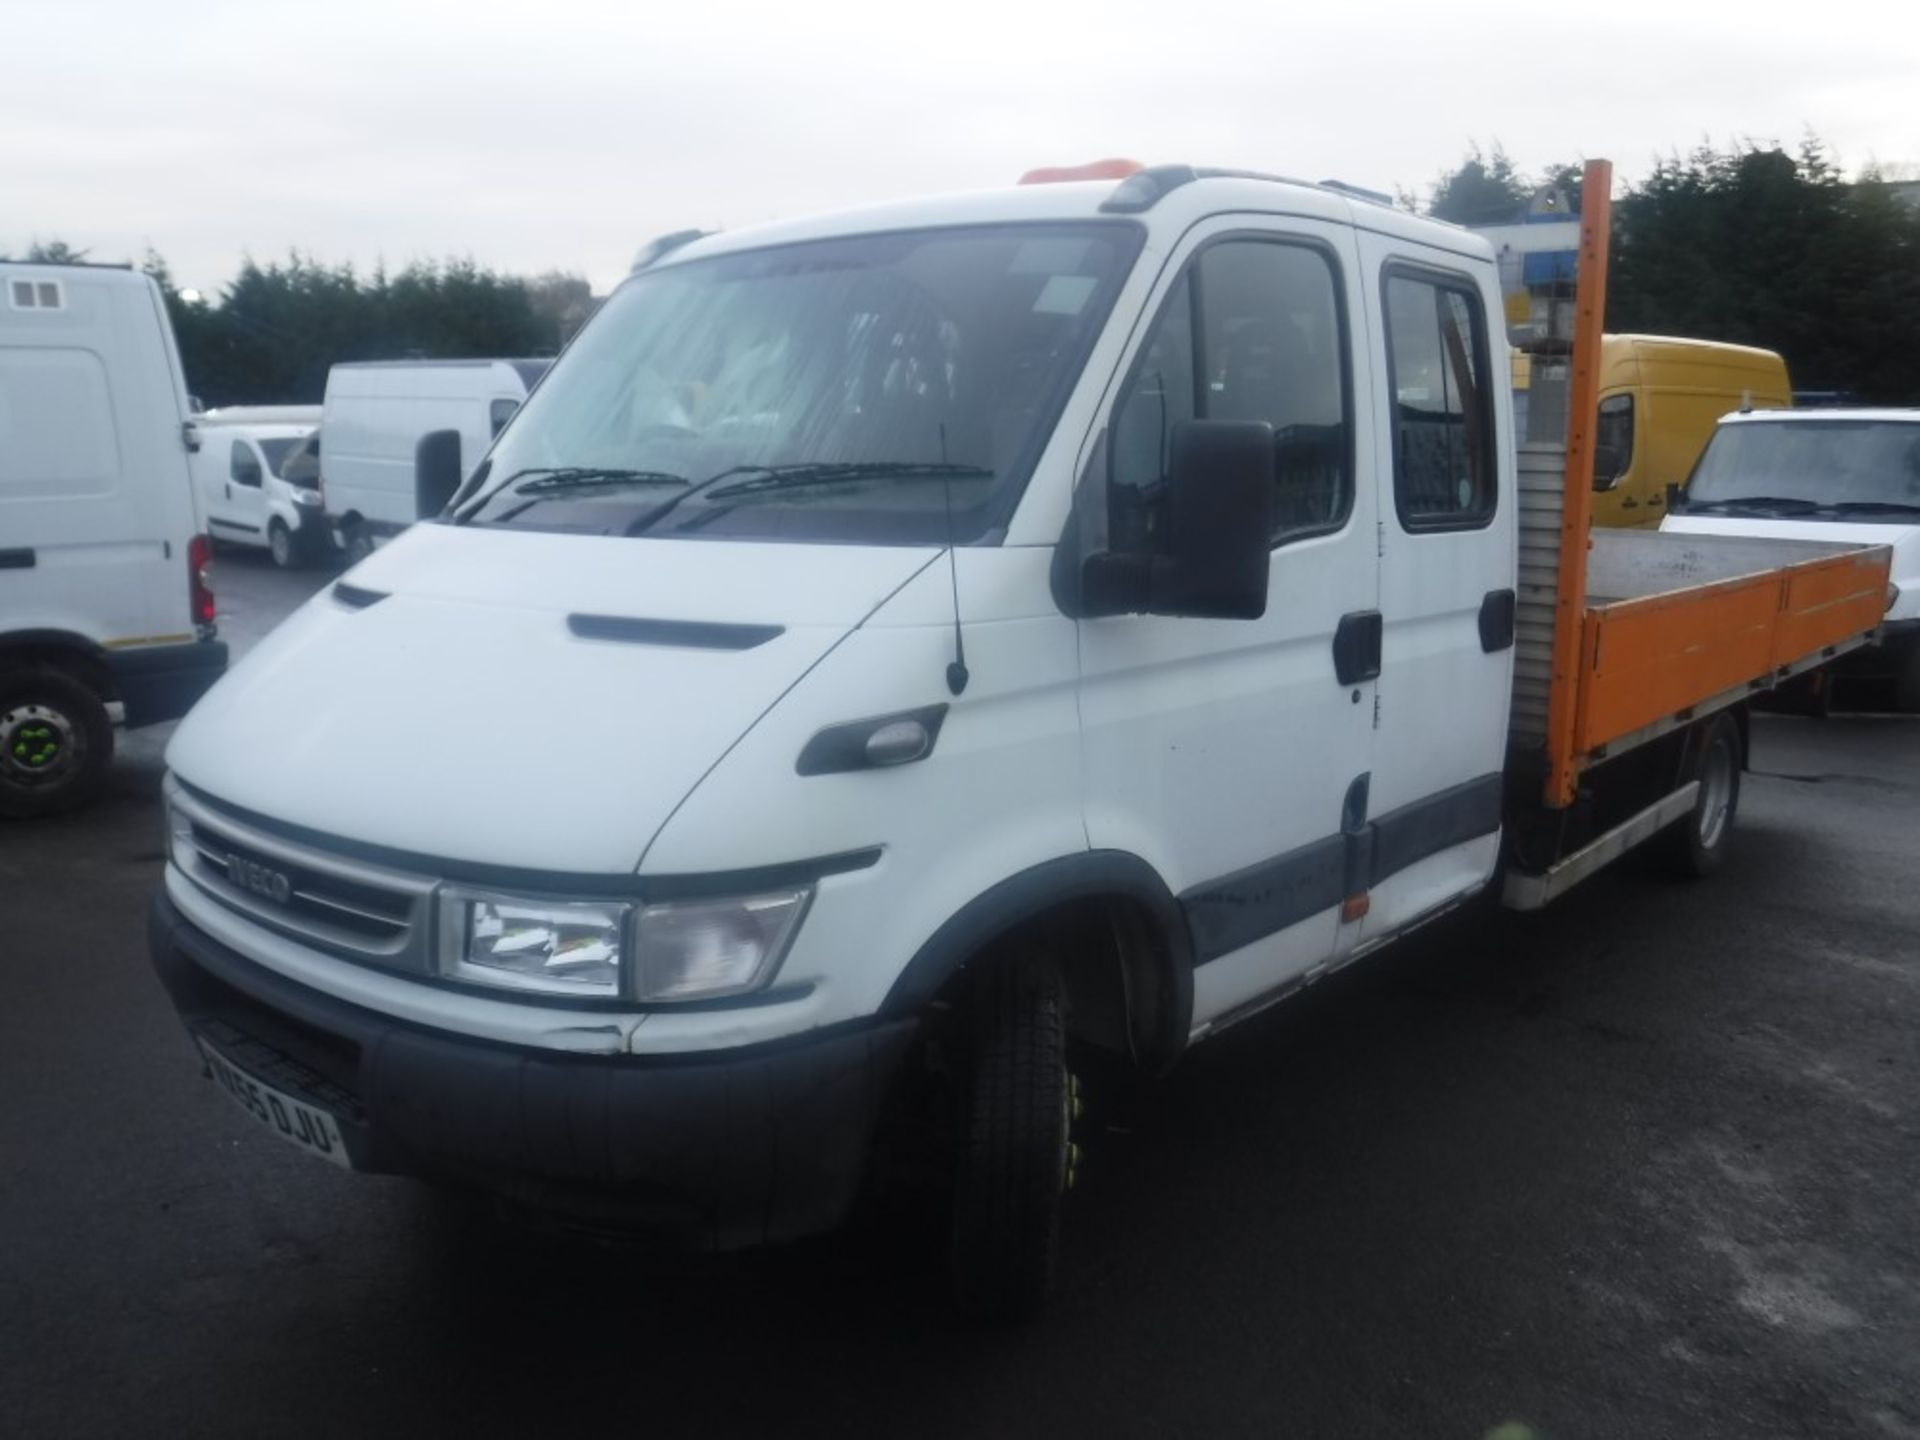 54 reg IVECO DAILY 50C17 DROPSIDE, SWING CRANE, 7 SEATER CAB, 1ST REG 11/05, TEST 01/20, 58011KM - Image 2 of 5